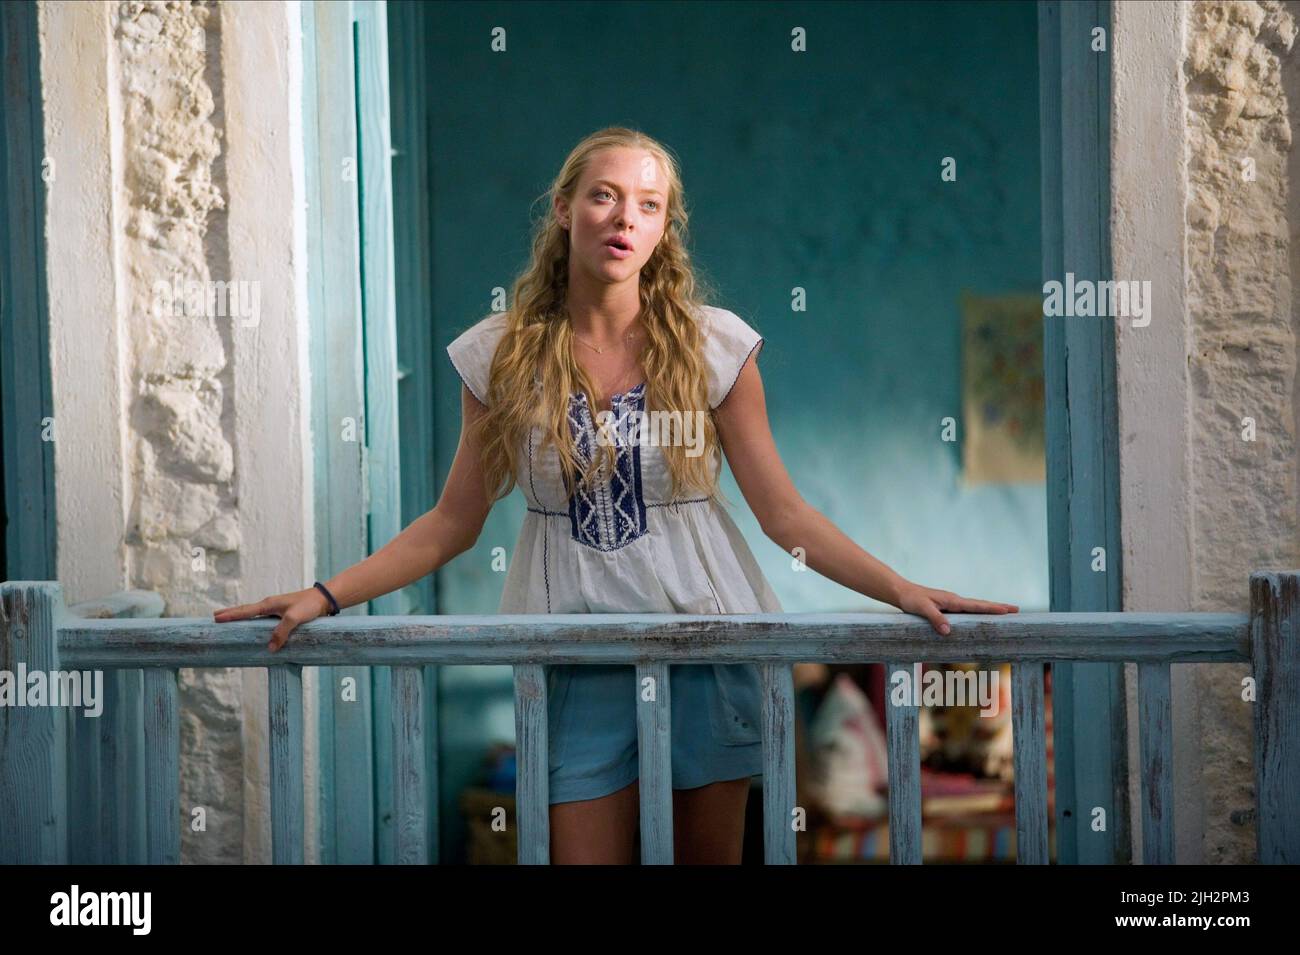 Mama mia film hi-res stock photography and images - Alamy